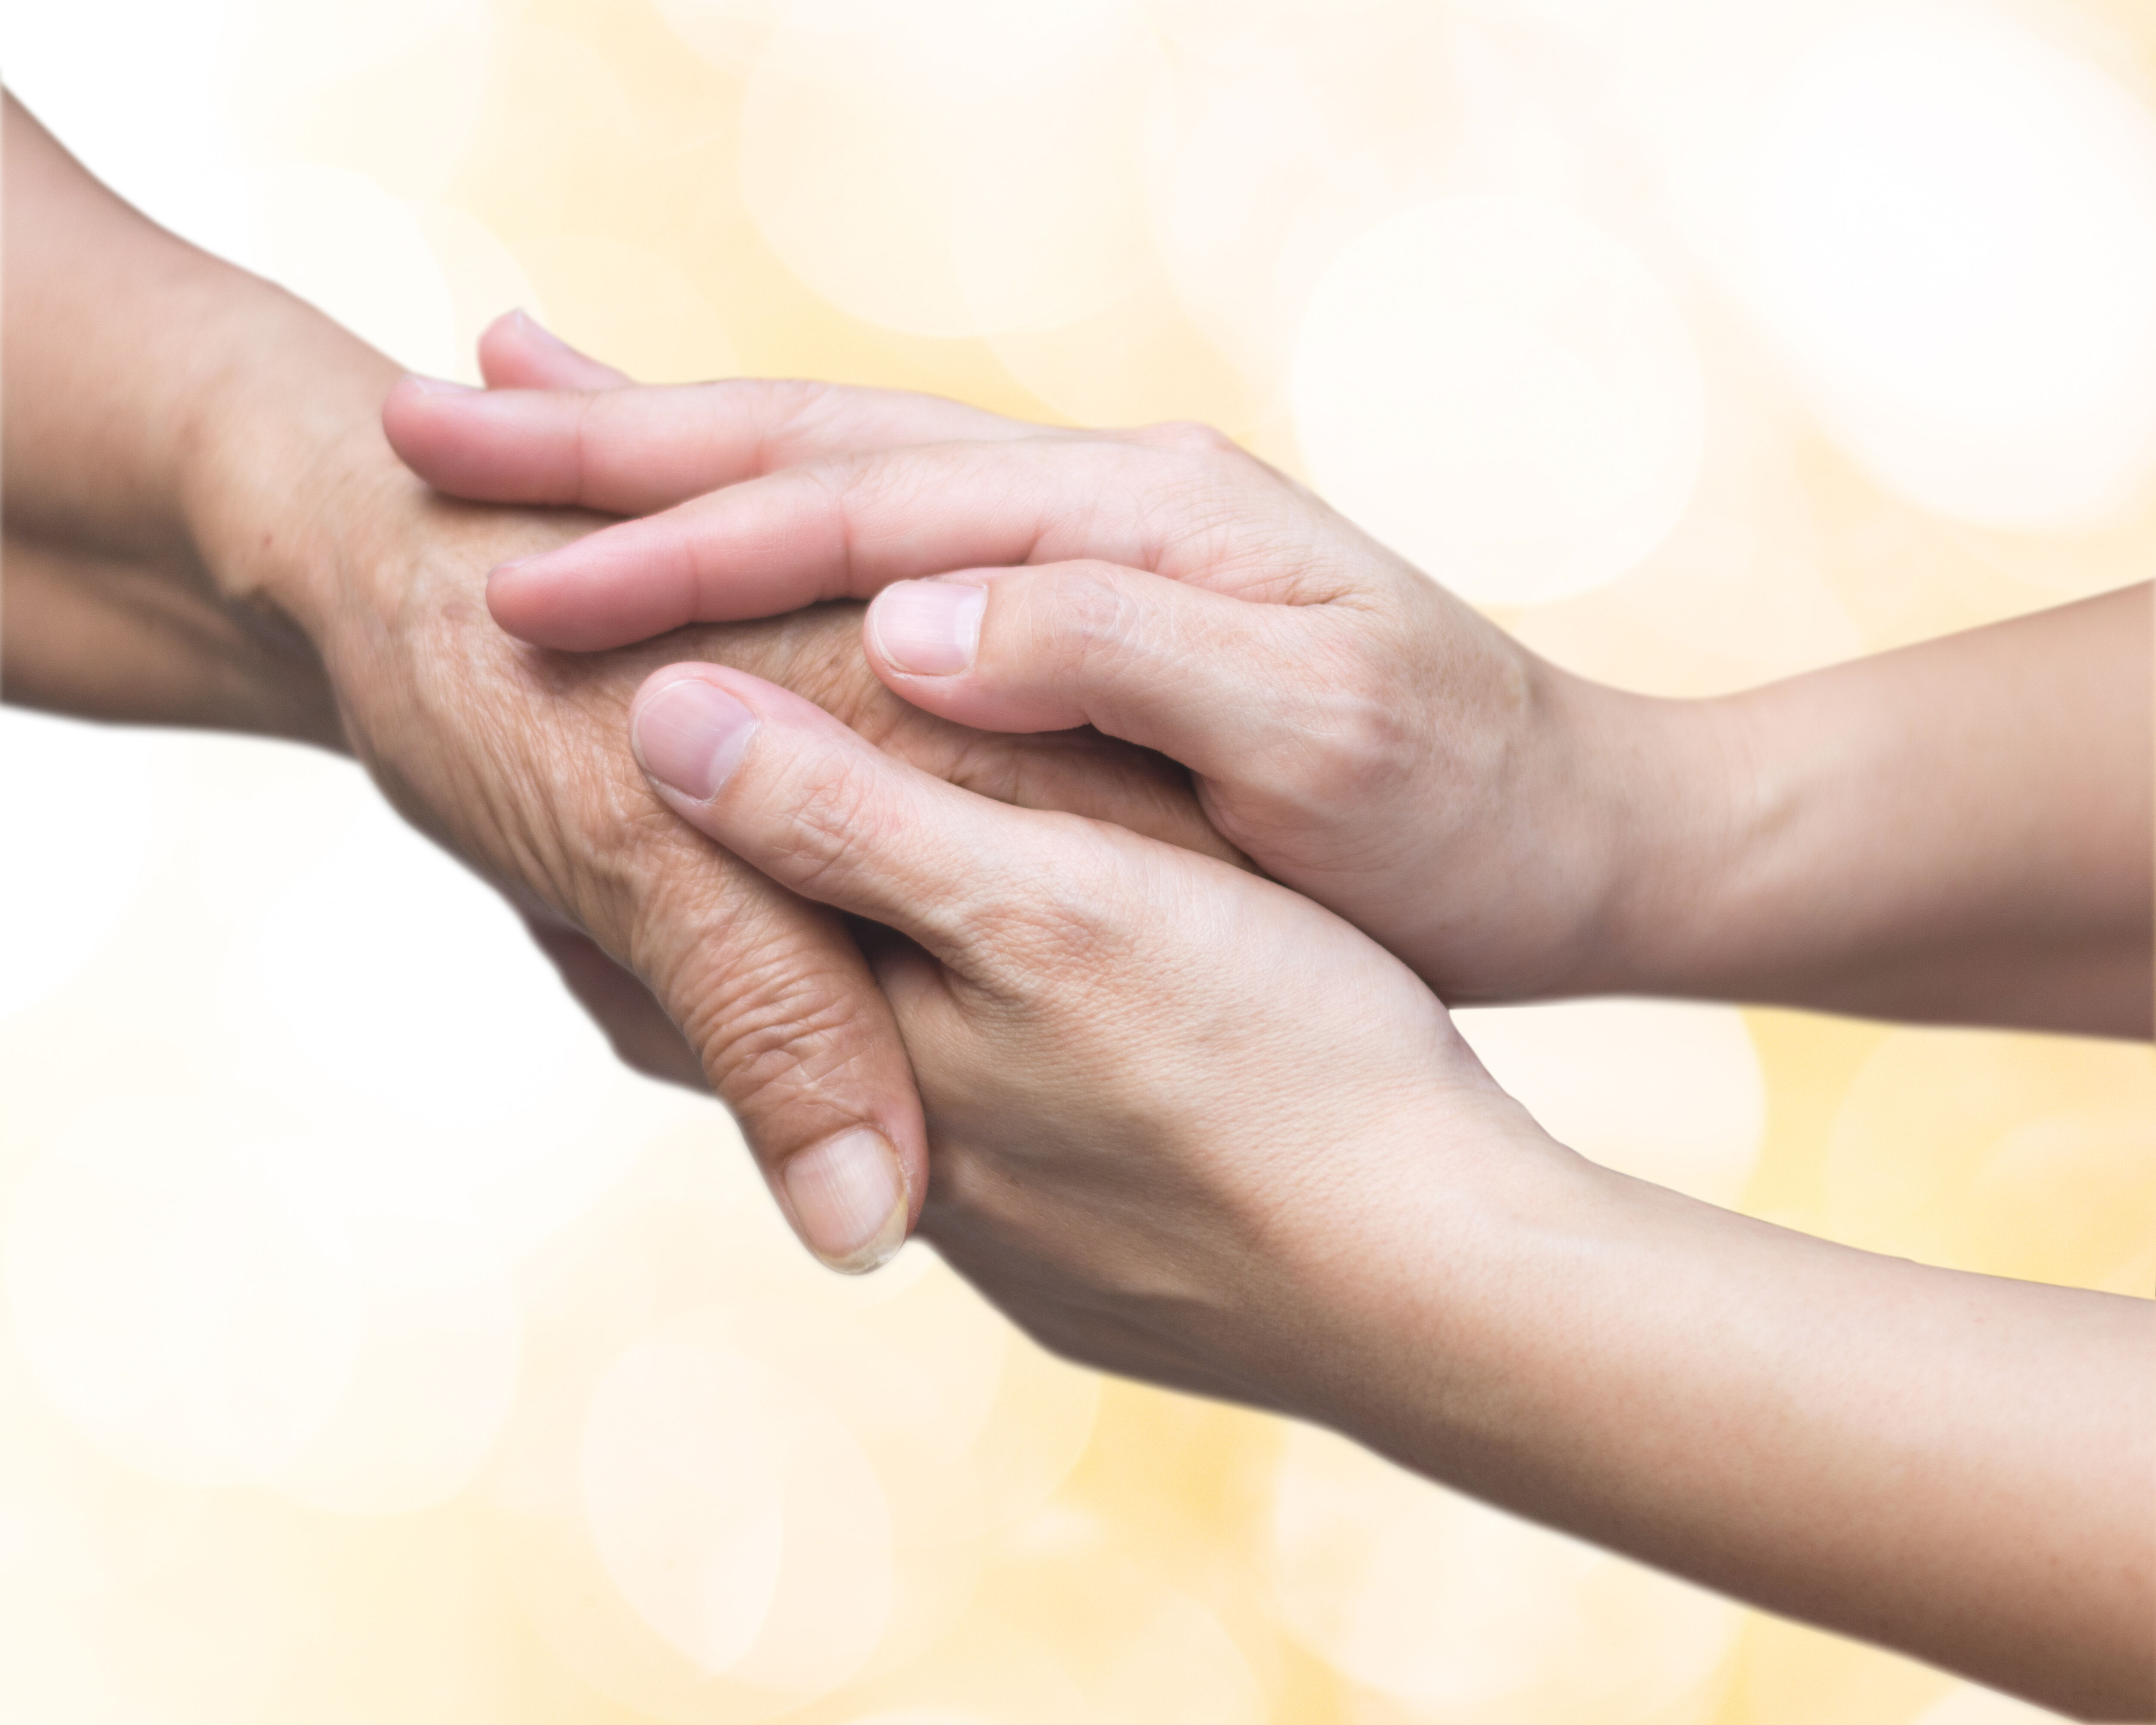 Caregiver, carer hand holding elder hand for hospice care. Philanthropy kindness to disabled old people concept with gold bokeh background.Happy mother's day.